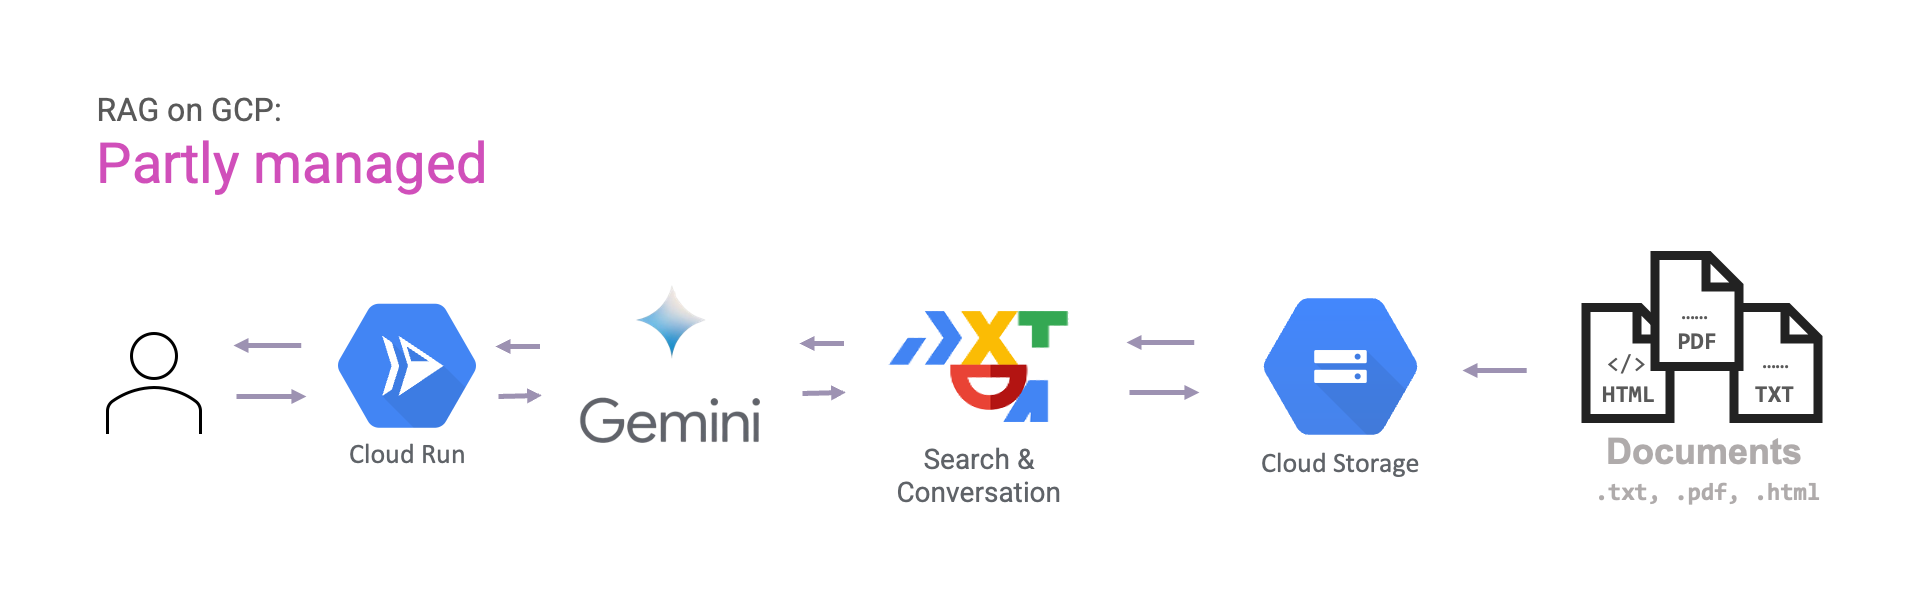 Partly managed RAG using Search & Conversation for document retrieval and Gemini for answer generation.